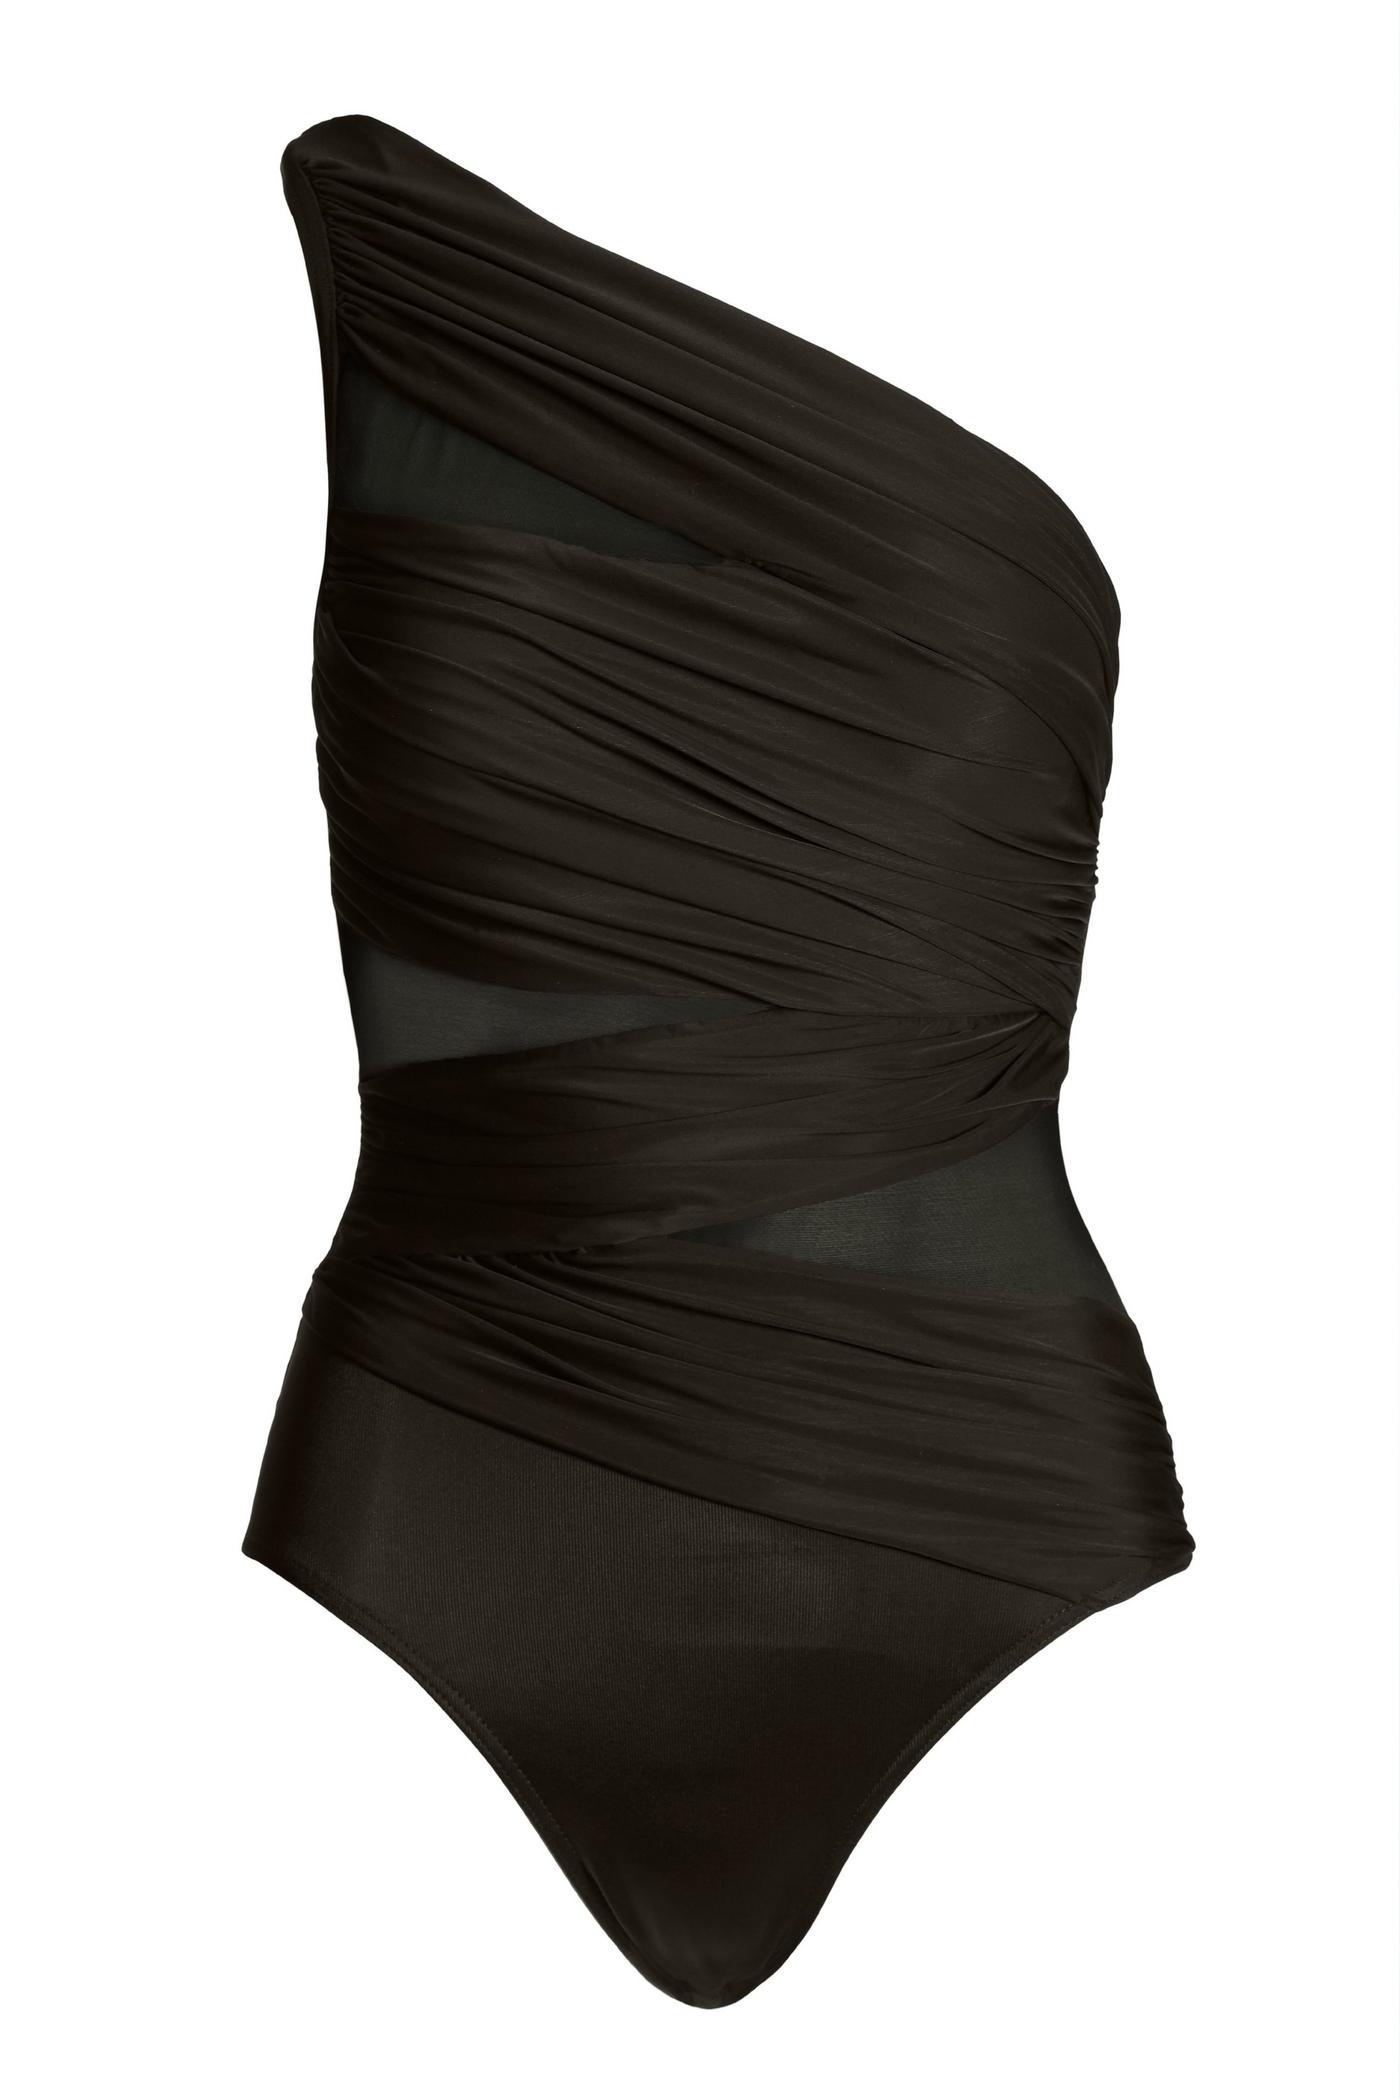 Beyond The Sea Mesh One Piece Black One Shoulder Swimsuit